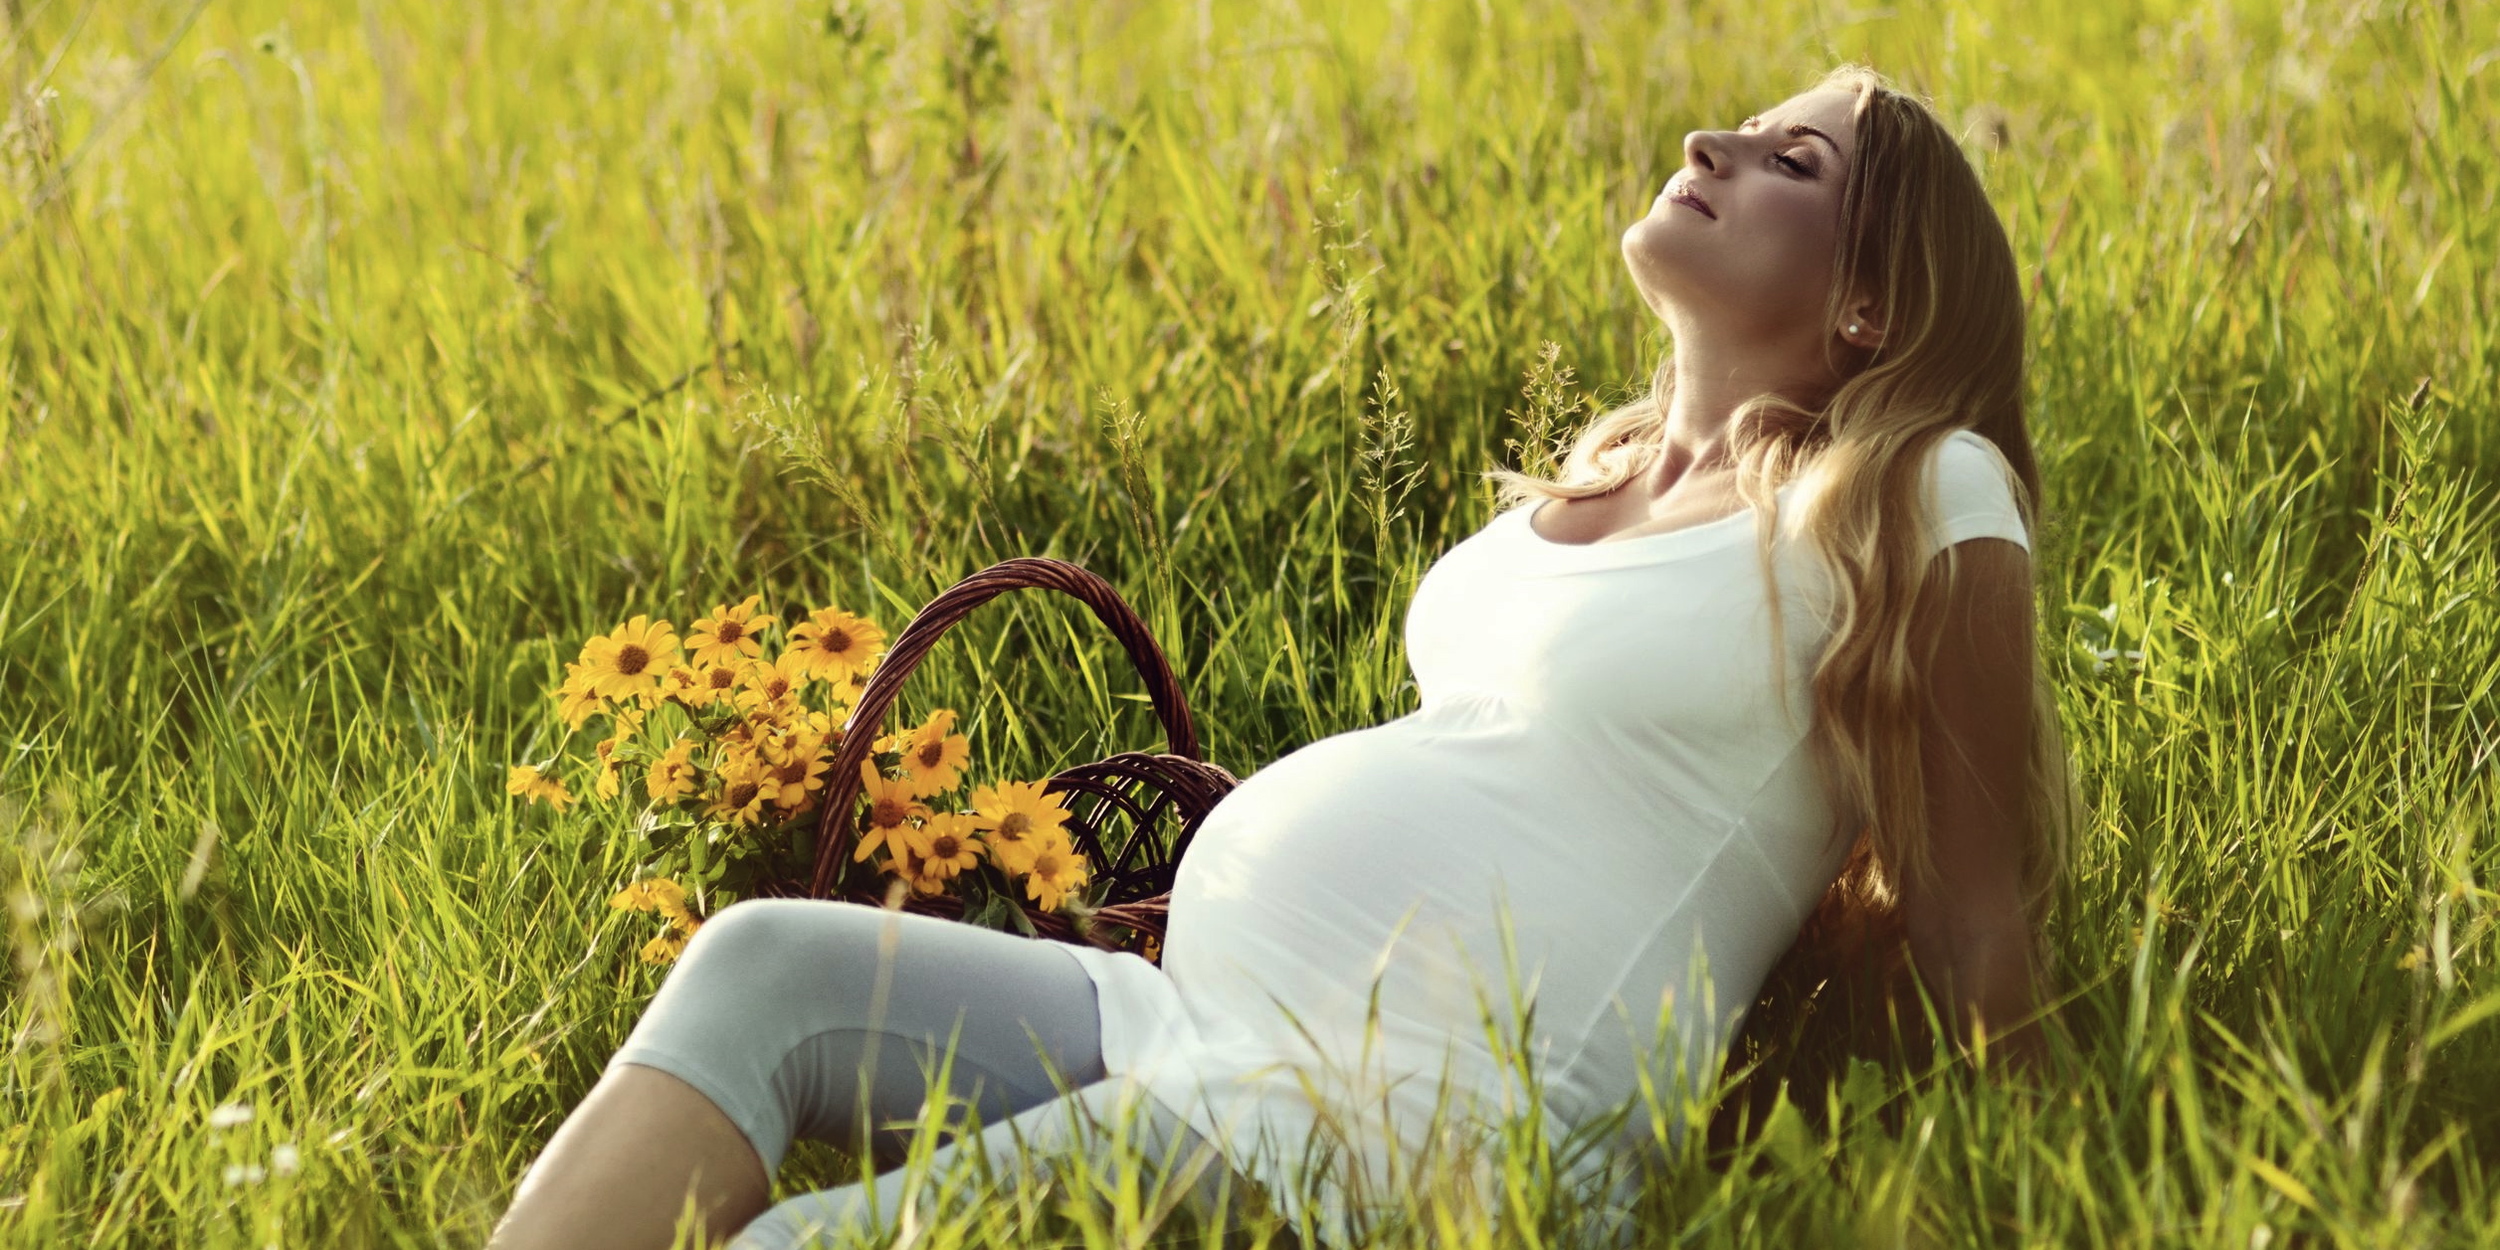 Pregnancy rejuvenates the reproductive system by 2-3 years